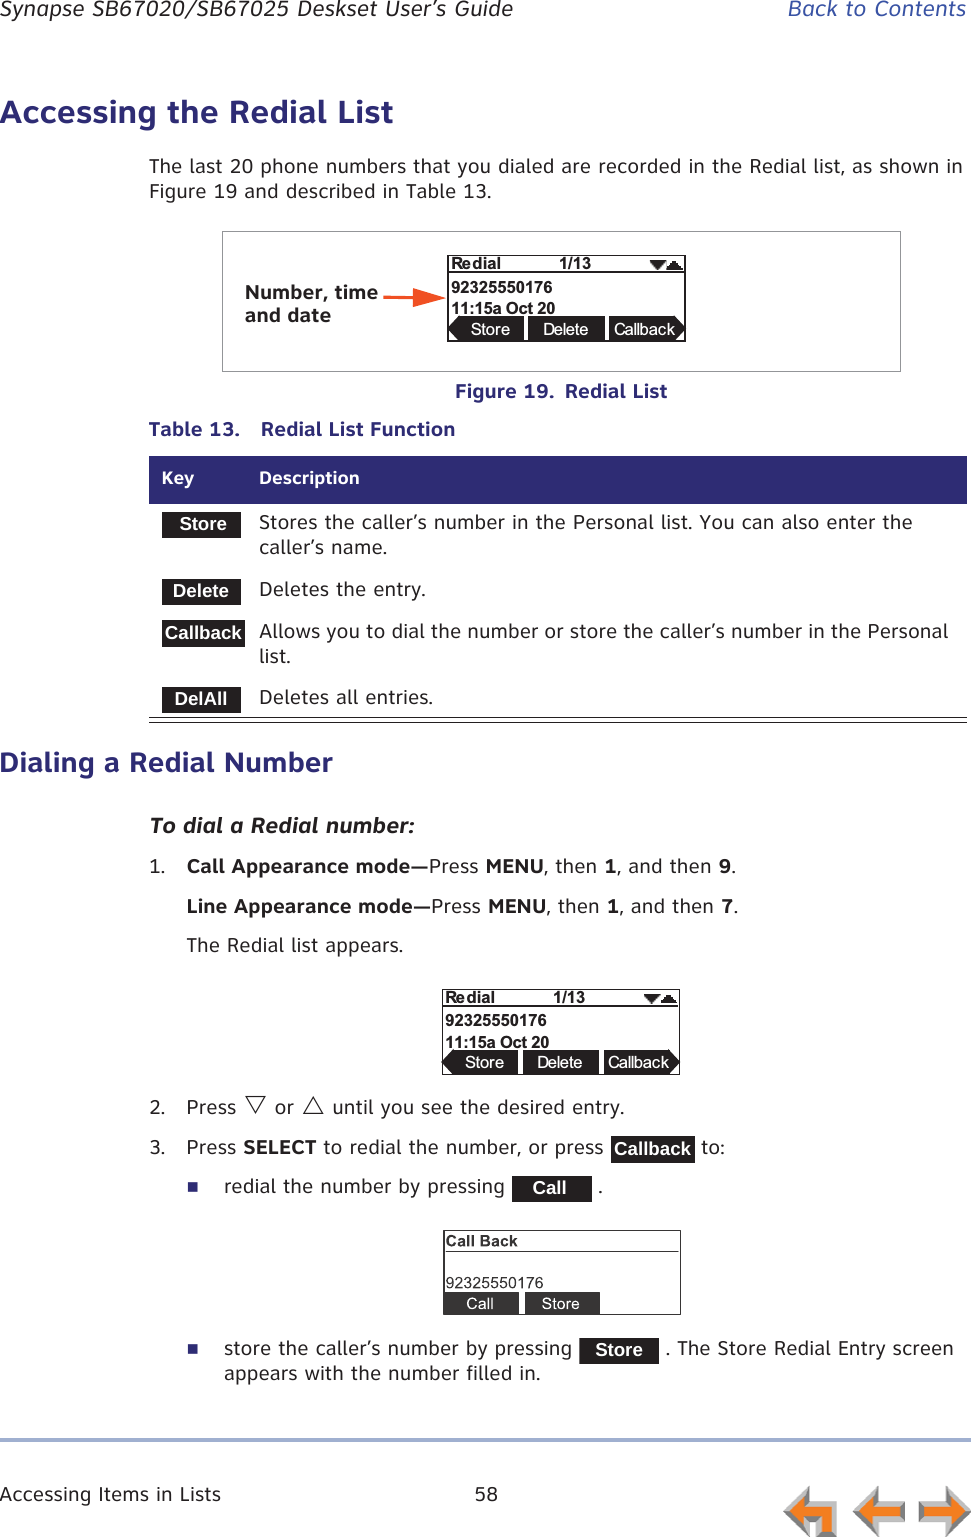 Accessing Items in Lists 58      Synapse SB67020/SB67025 Deskset User’s Guide Back to ContentsAccessing the Redial ListThe last 20 phone numbers that you dialed are recorded in the Redial list, as shown in Figure 19 and described in Table 13.Figure 19.  Redial ListDialing a Redial NumberTo dial a Redial number:1. Call Appearance mode—Press MENU, then 1, and then 9.Line Appearance mode—Press MENU, then 1, and then 7.The Redial list appears.2. Press V or U until you see the desired entry.3. Press SELECT to redial the number, or press   to: redial the number by pressing   .store the caller’s number by pressing   . The Store Redial Entry screen appears with the number filled in.Table 13.  Redial List FunctionKey  DescriptionStores the caller’s number in the Personal list. You can also enter the caller’s name.Deletes the entry.Allows you to dial the number or store the caller’s number in the Personal list.Deletes all entries.  H2325550176 &amp;/Store Delete CallbackNumber, time and dateStoreDeleteCallbackDelAll  H2325550176 &amp;/Store Delete CallbackCallbackCallStore